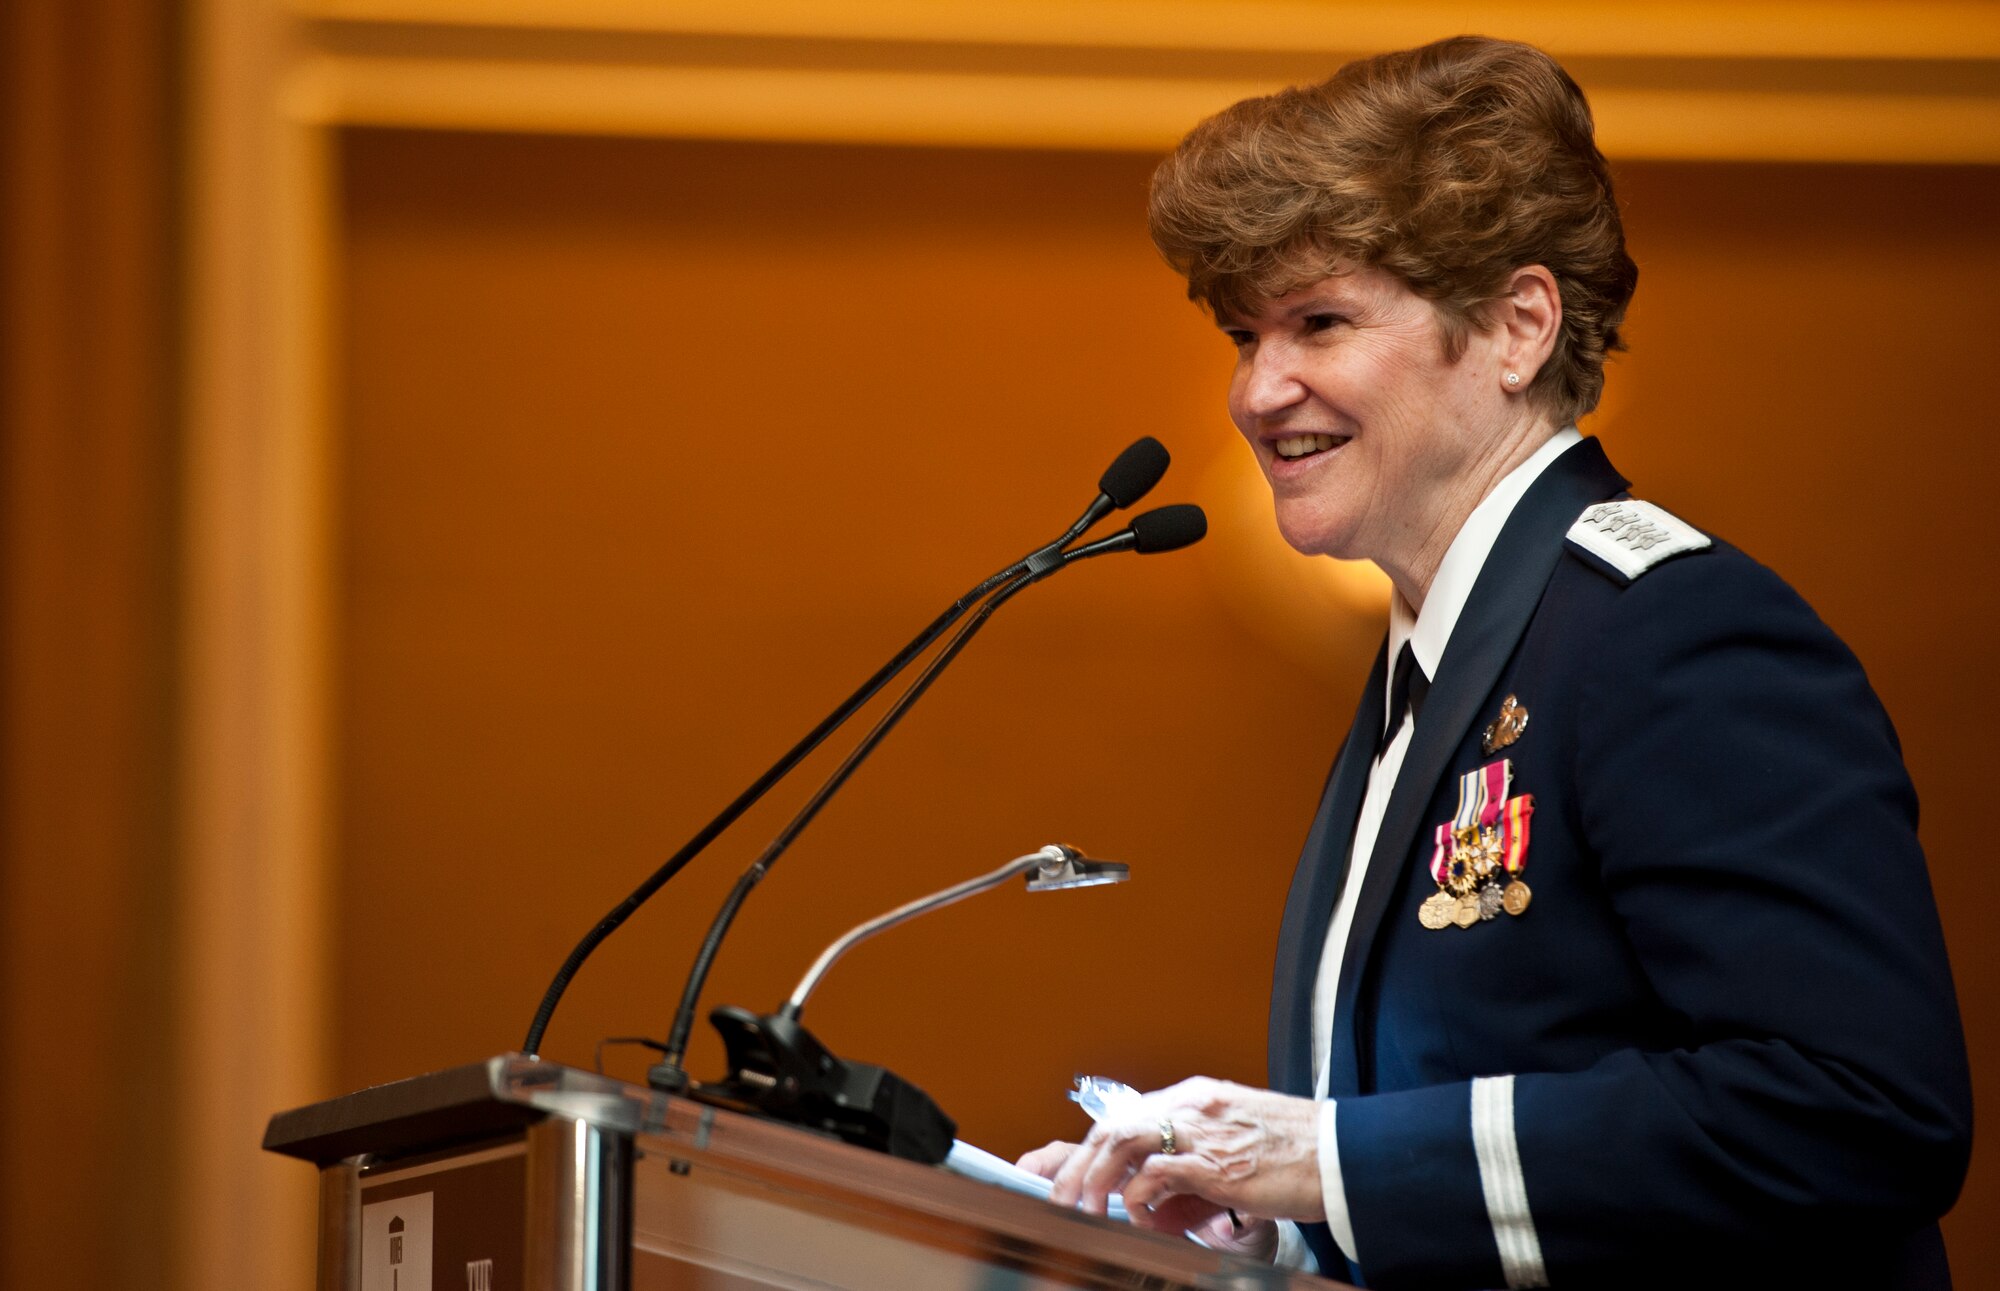 Gen. Janet C. Wolfenbarger gives the keynote address at the 15th anniversary celebration of the Women in Military Service for America Memorial in Washington, D.C., Oct. 19, 2012. Wolfenbarger is the commander of Air Force Material Command and she is the first four-star general in the Air Force. (U.S. Air Force photo/Senior Airman Andrew Lee)